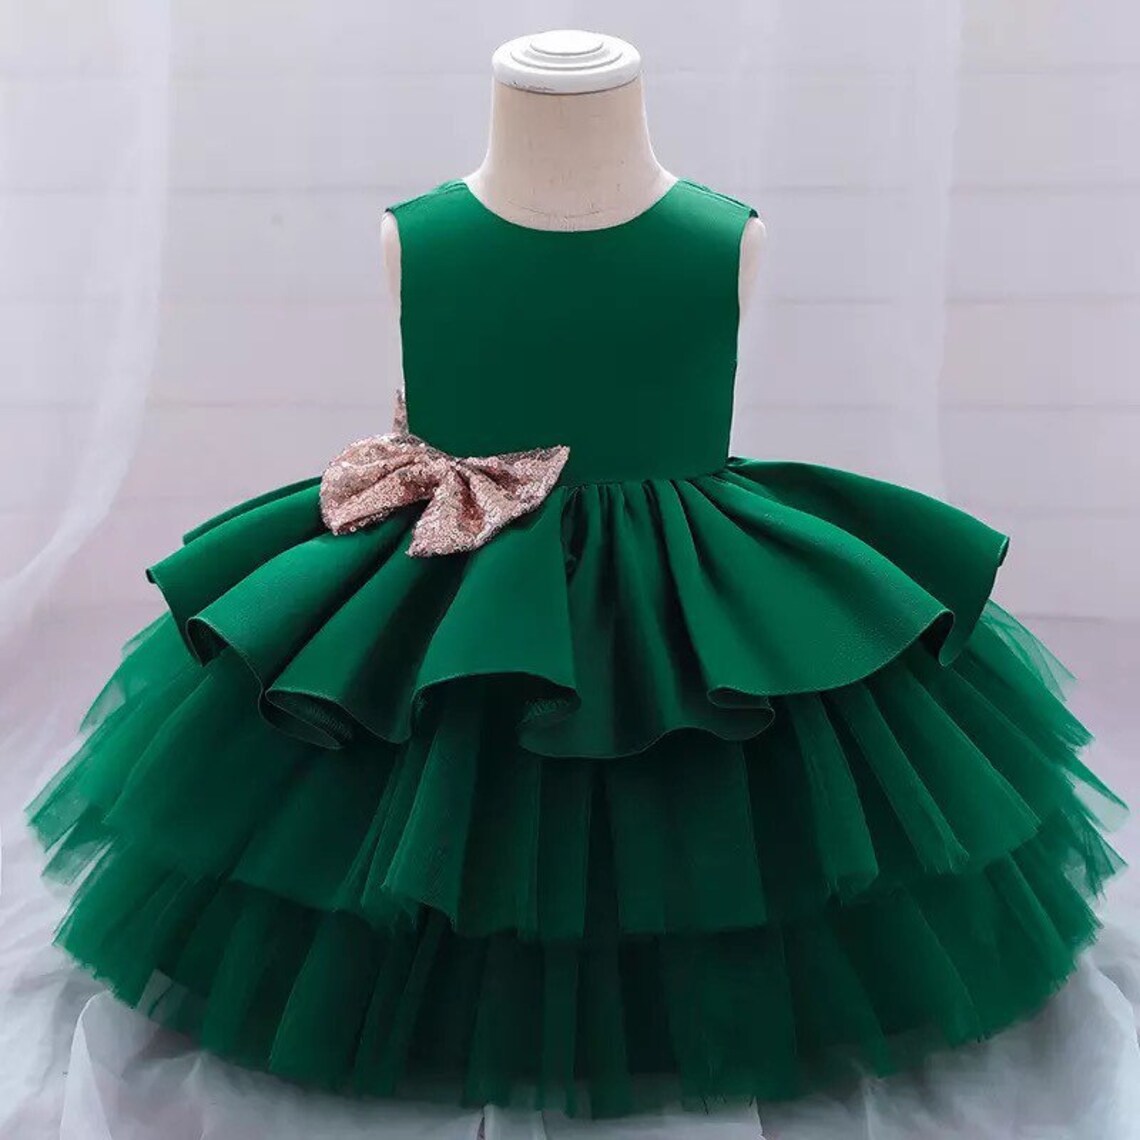 Emerald Green Evening Tulle Dress Birthday Dress Party | Etsy